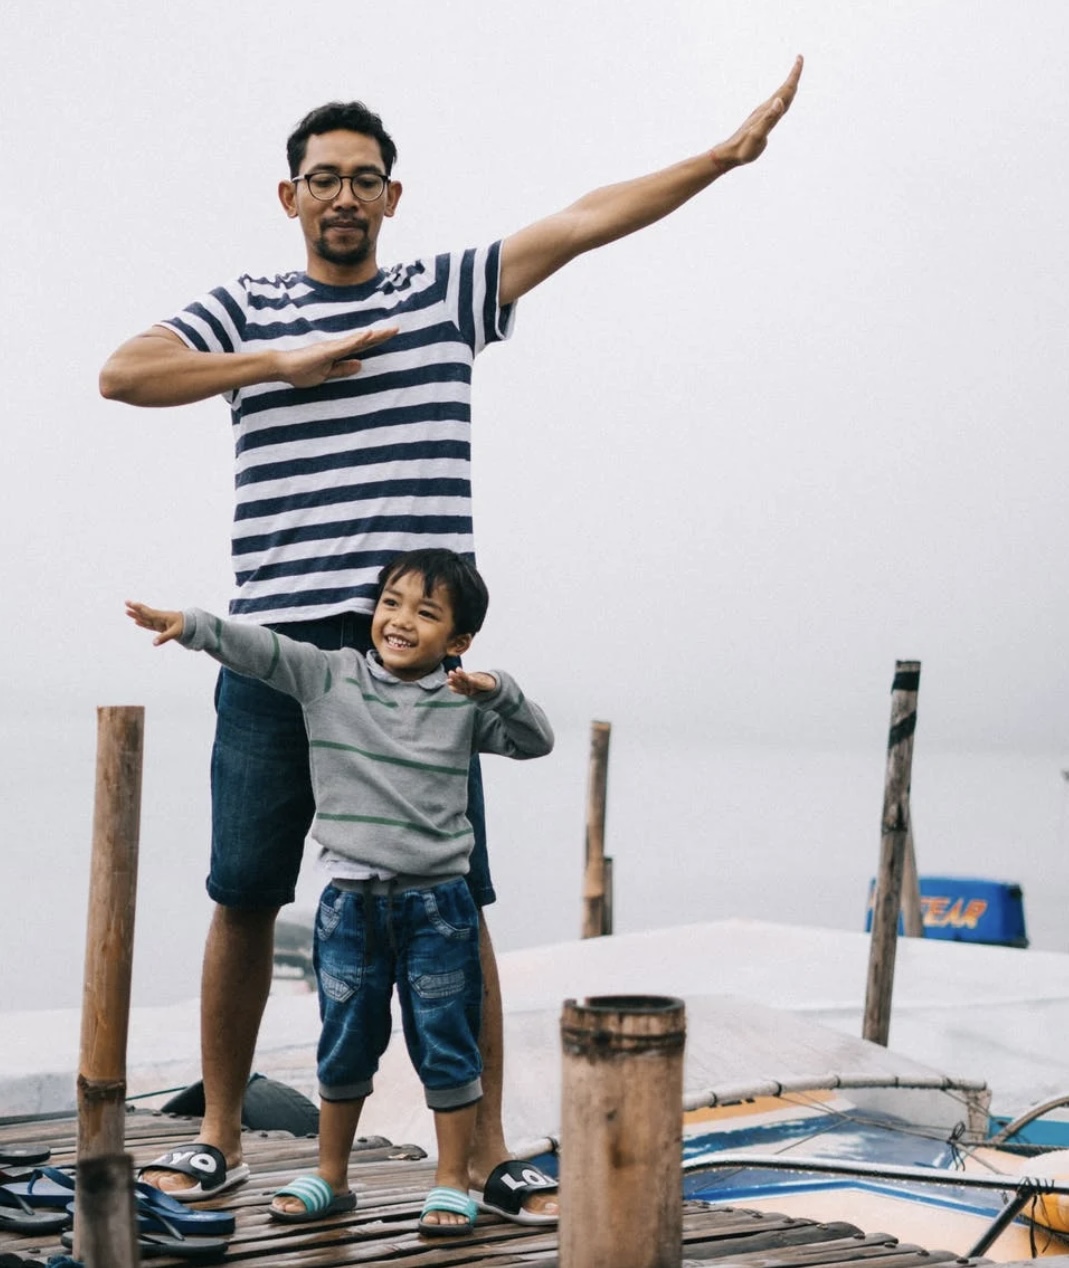 5 Great Ideas for Father’s Day in Northern Virginia